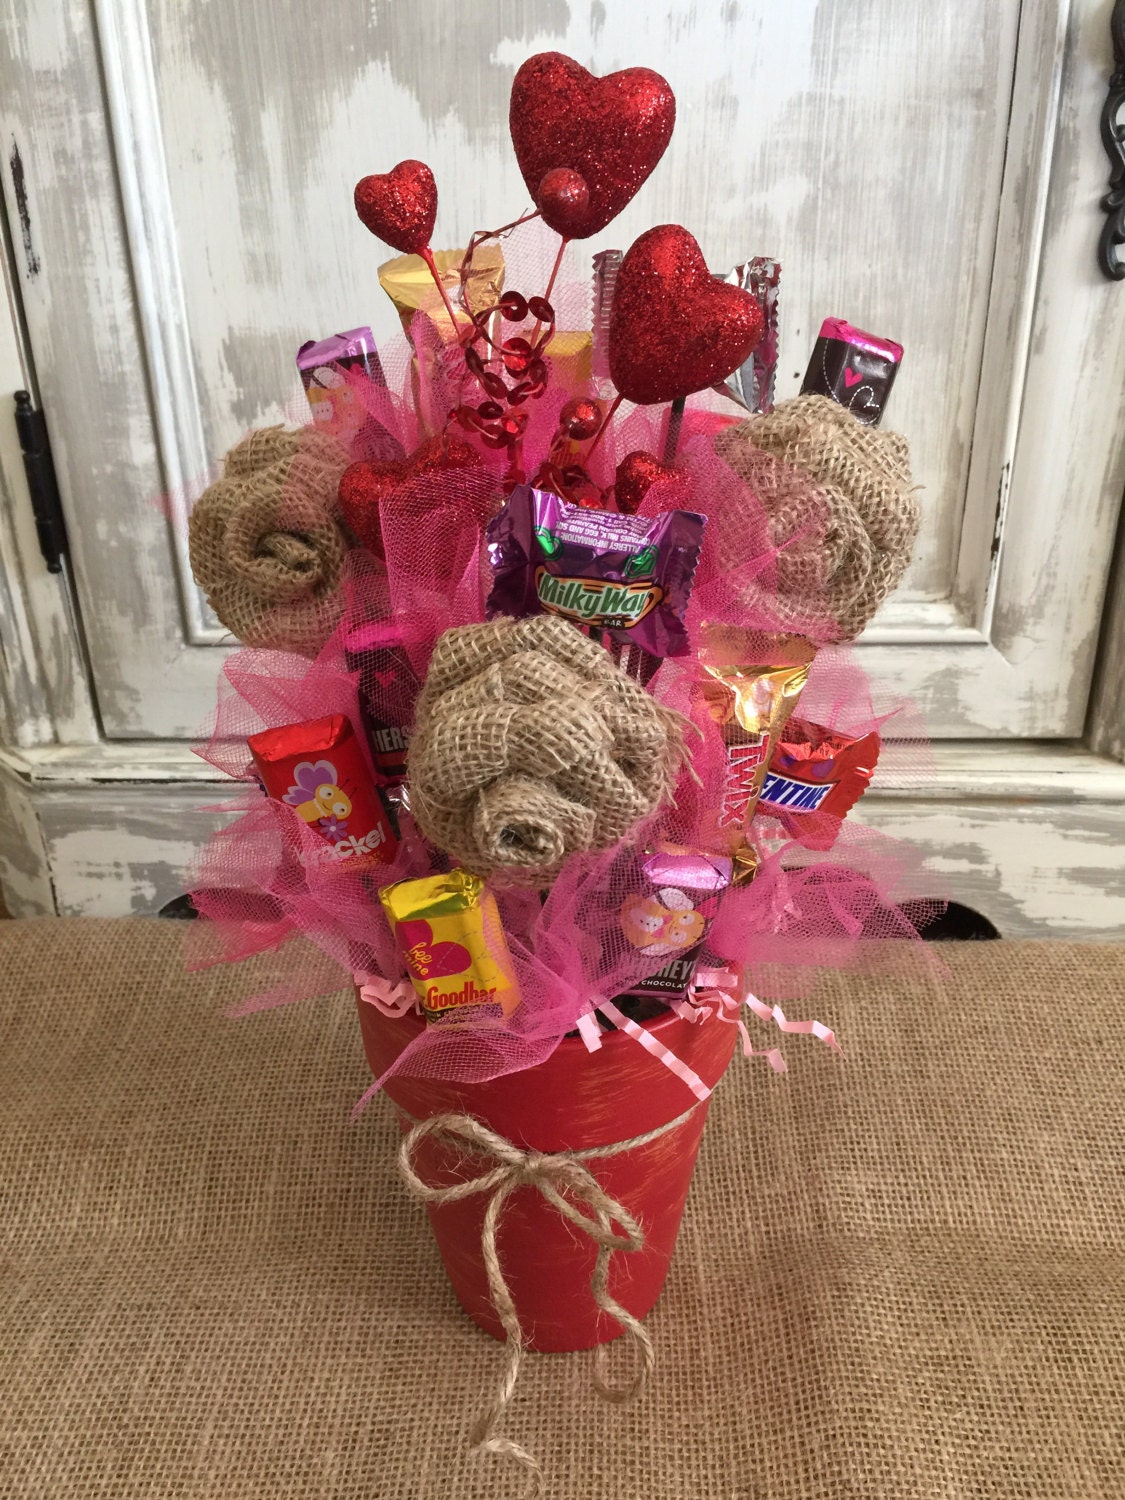 Candy flowers, Chocolate flowers bouquet, Flowers bouquet gift